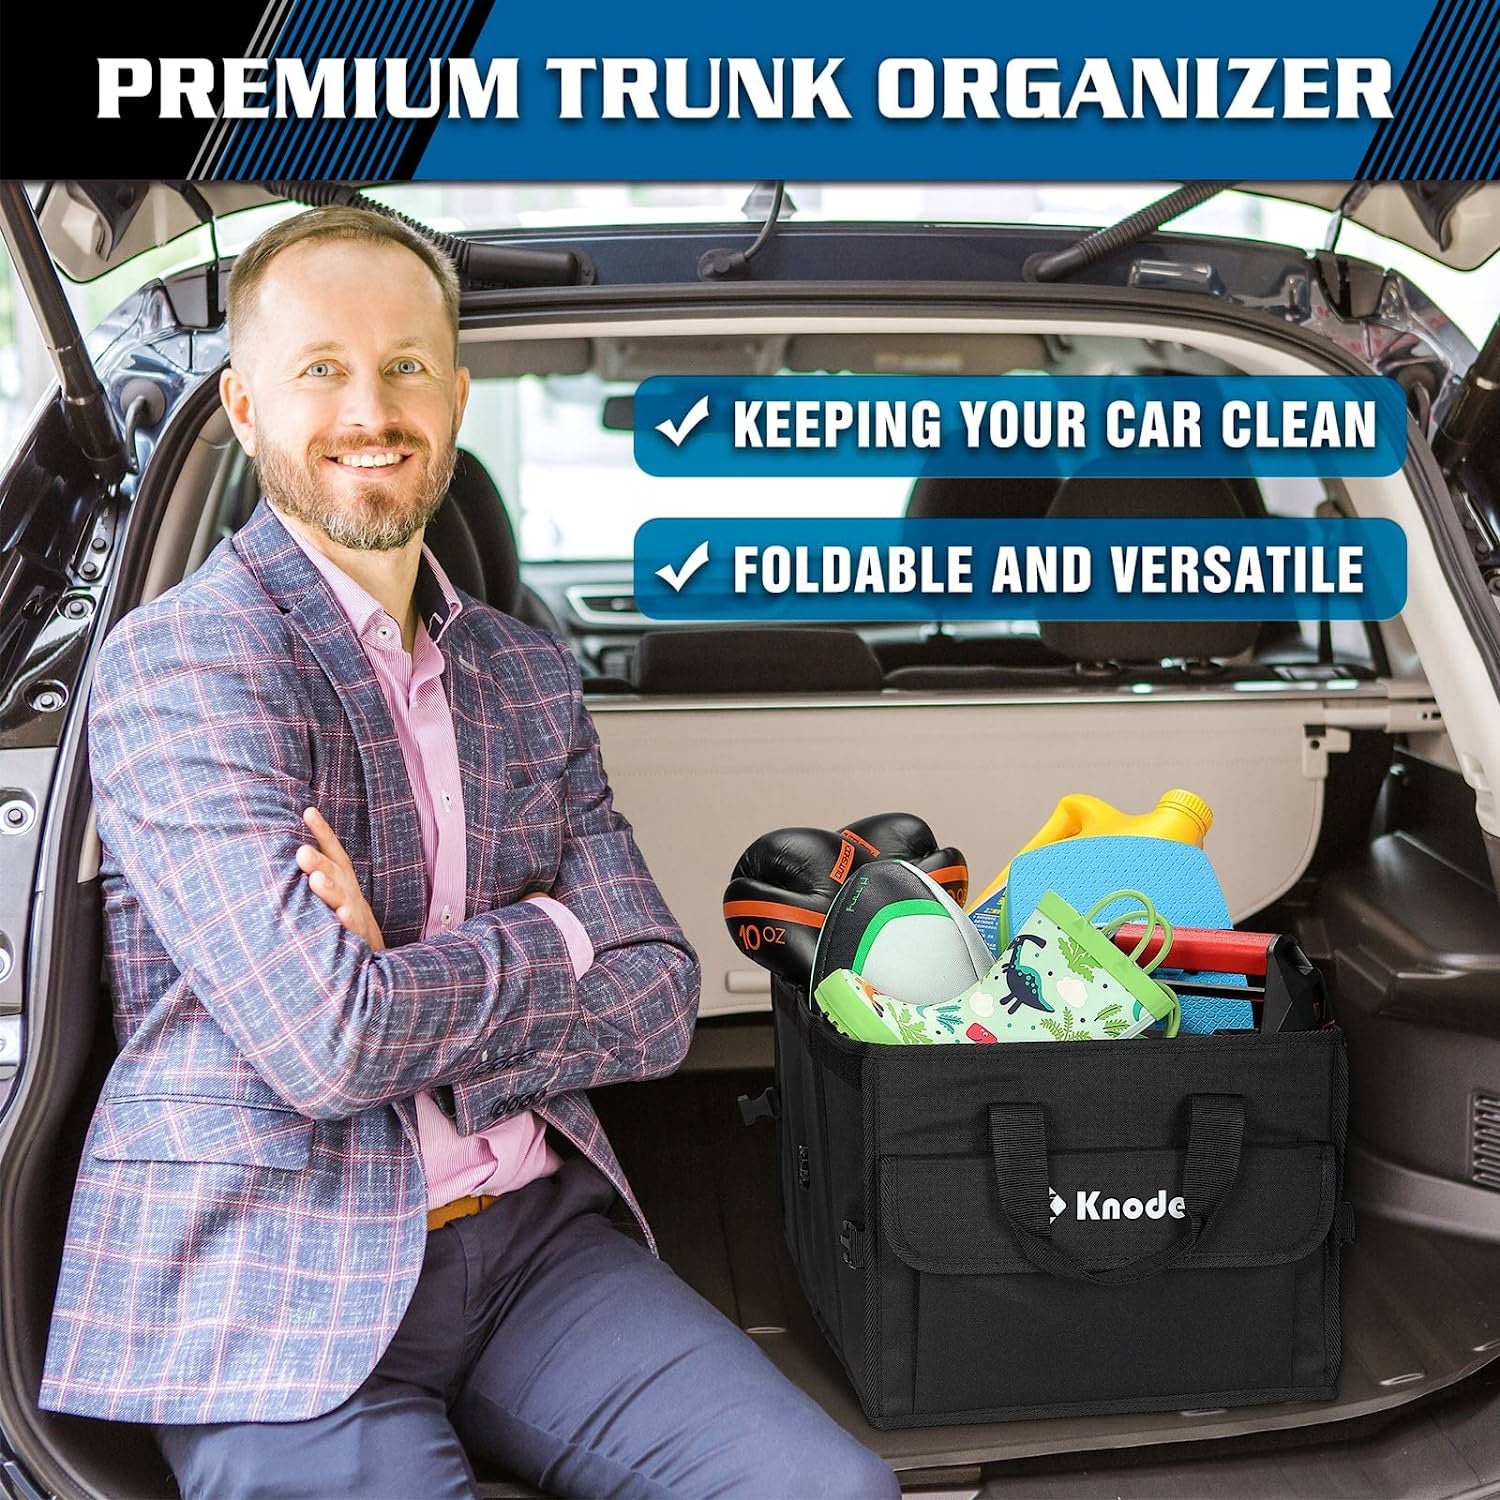 XL Car Trunk Organizer with Lid, Collapsible Car Trunk Storage Organizer, Car Organizer and Storage for SUV, Truck, Sedan (Black)